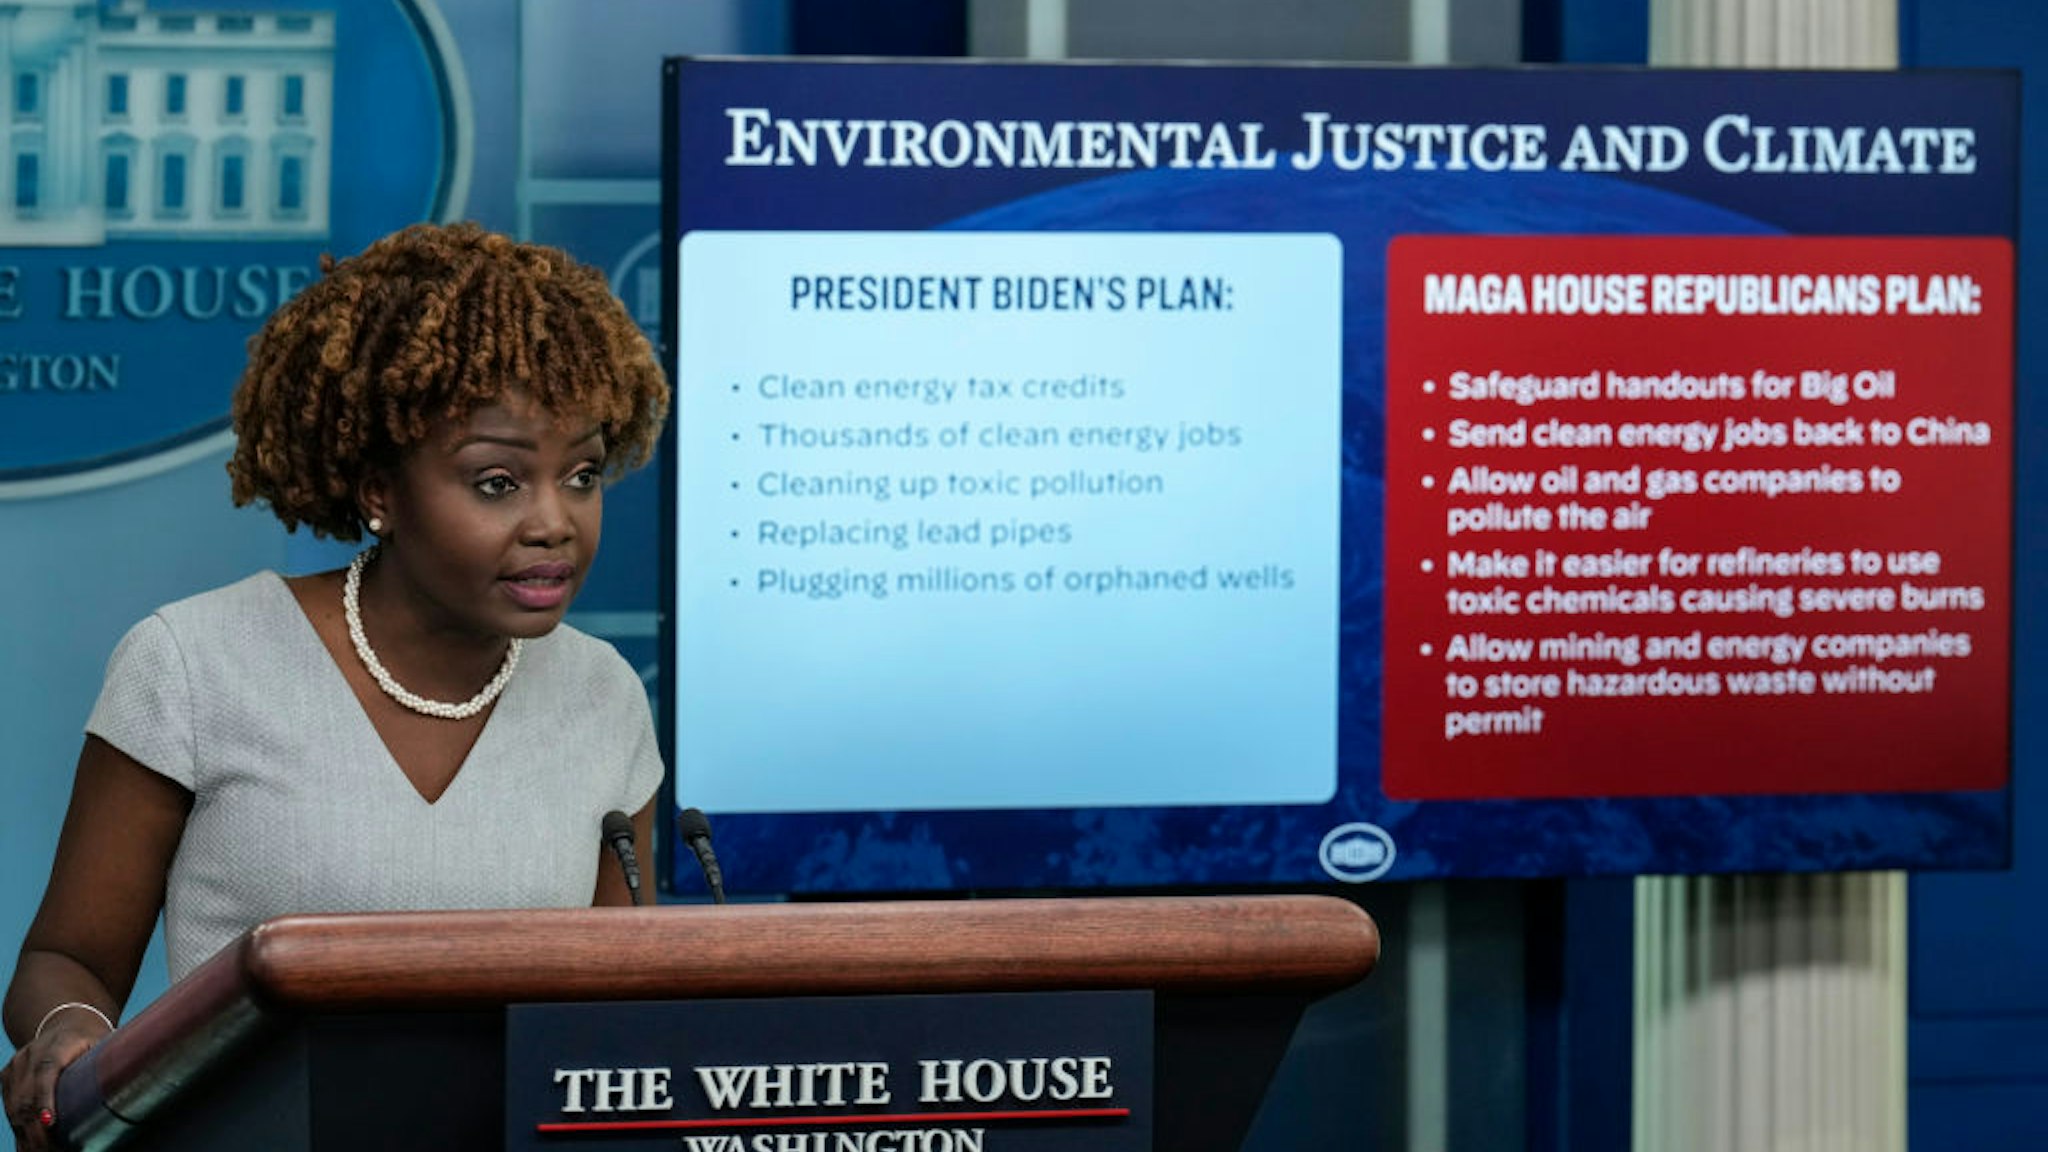 WASHINGTON, DC - APRIL 21: White House Press Secretary Karine Jean-Pierre speaks during the daily press briefing at the White House April 21, 2023 in Washington, DC. This afternoon President Joe Biden will sign an executive order directing federal agencies to invest in communities that are disproportionately affected by pollution and climate change. (Photo by Drew Angerer/Getty Images)